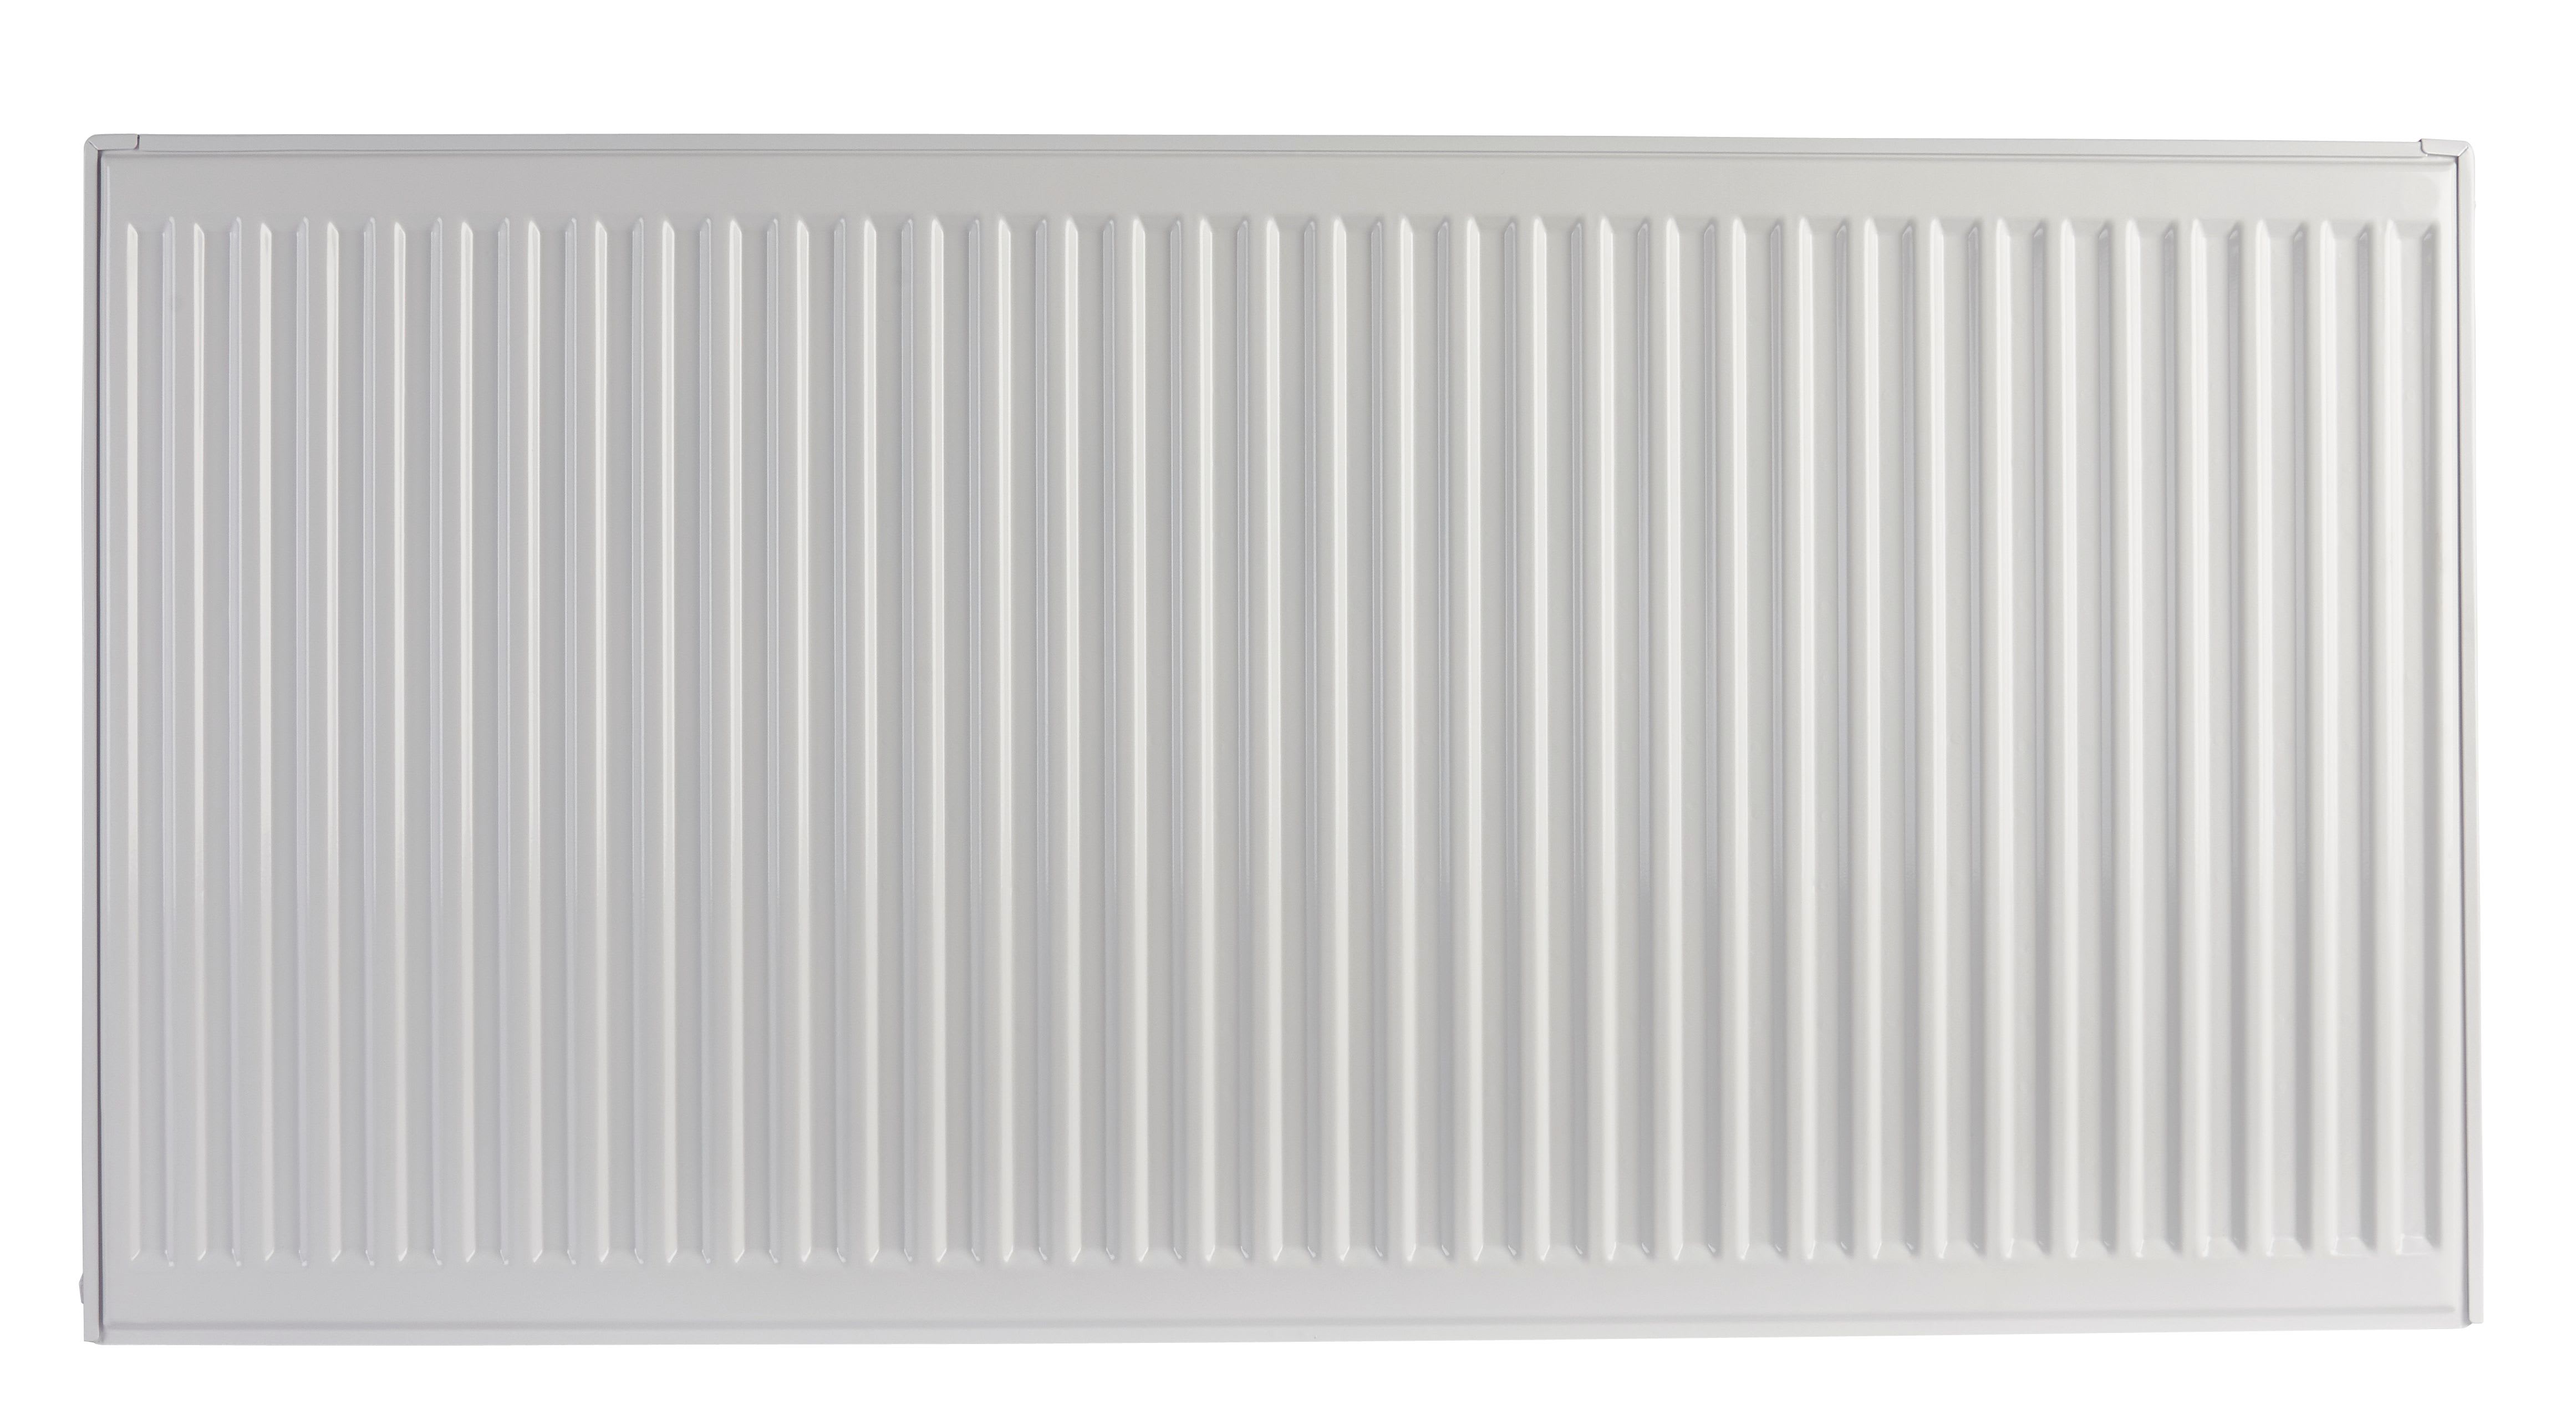 Double Panel Type 22 700x1600mm & 700x1800mm Central Heating Radiators